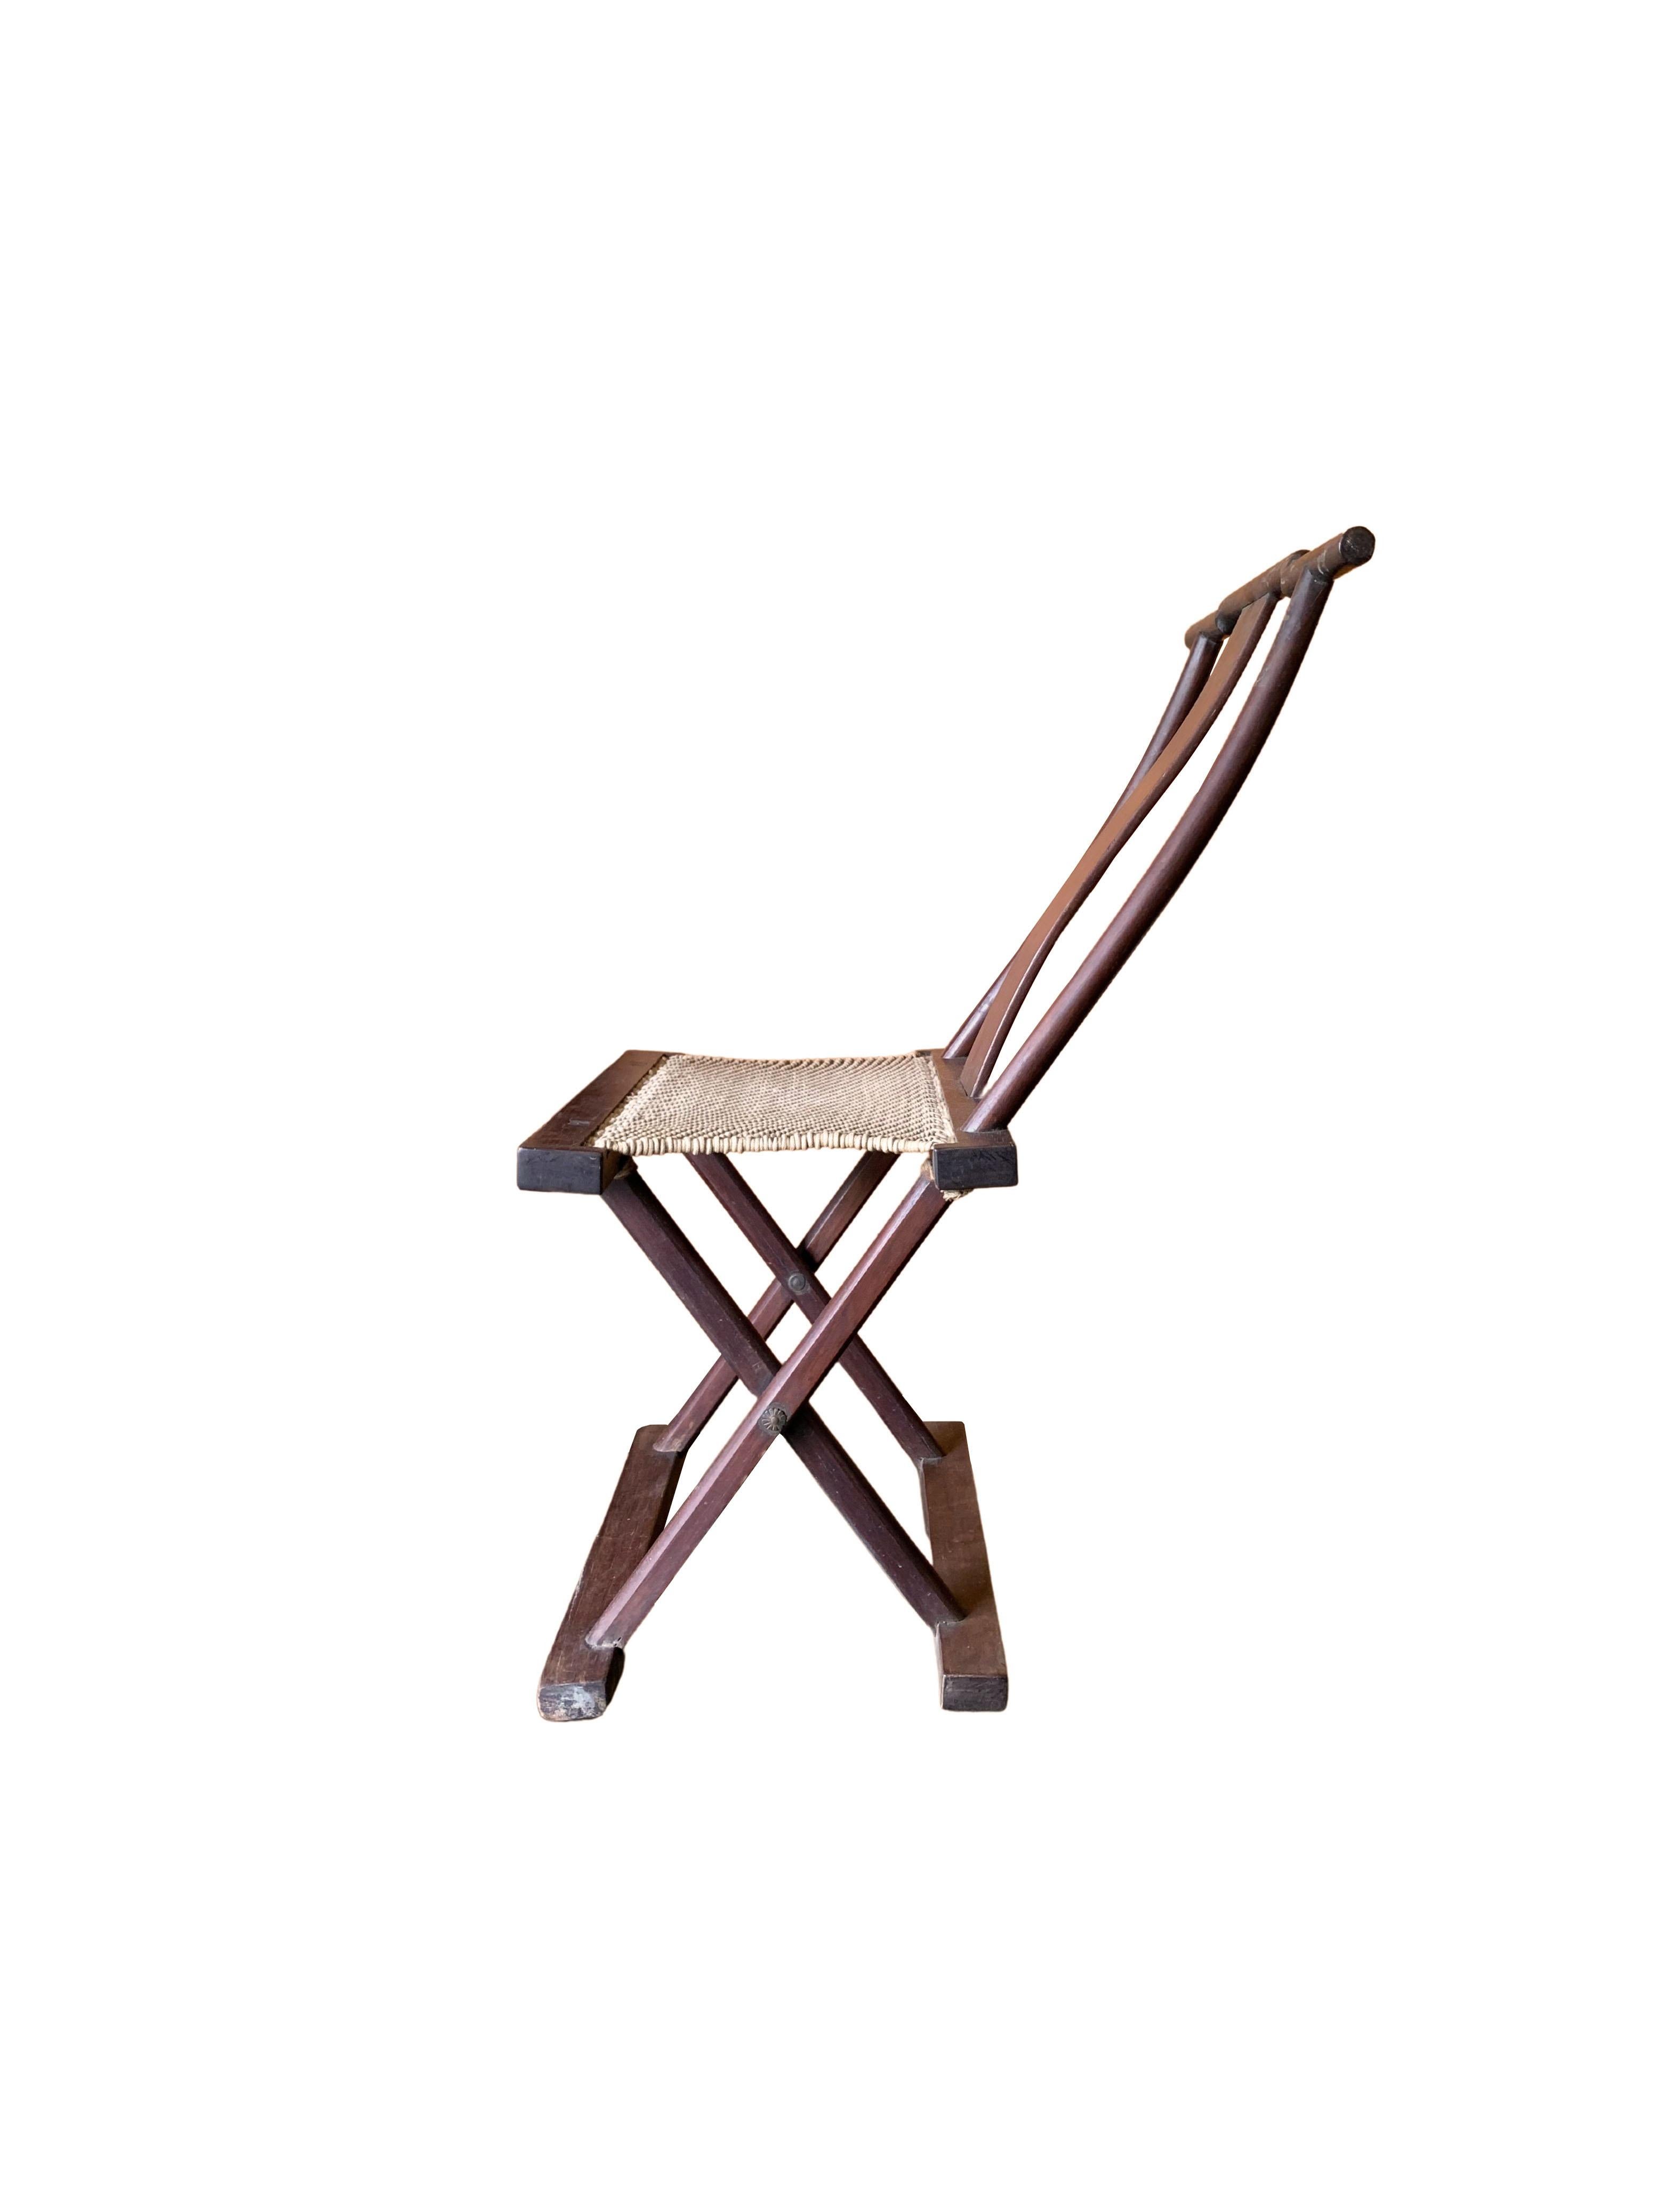 This folding chair from the early 20th Century crafted from a wood frame was once used by Chinese Travellers. The seat is crafted from woven fabric, this coupled with the backrest makes for a comfortable chair. Its elegant, slender and minimal